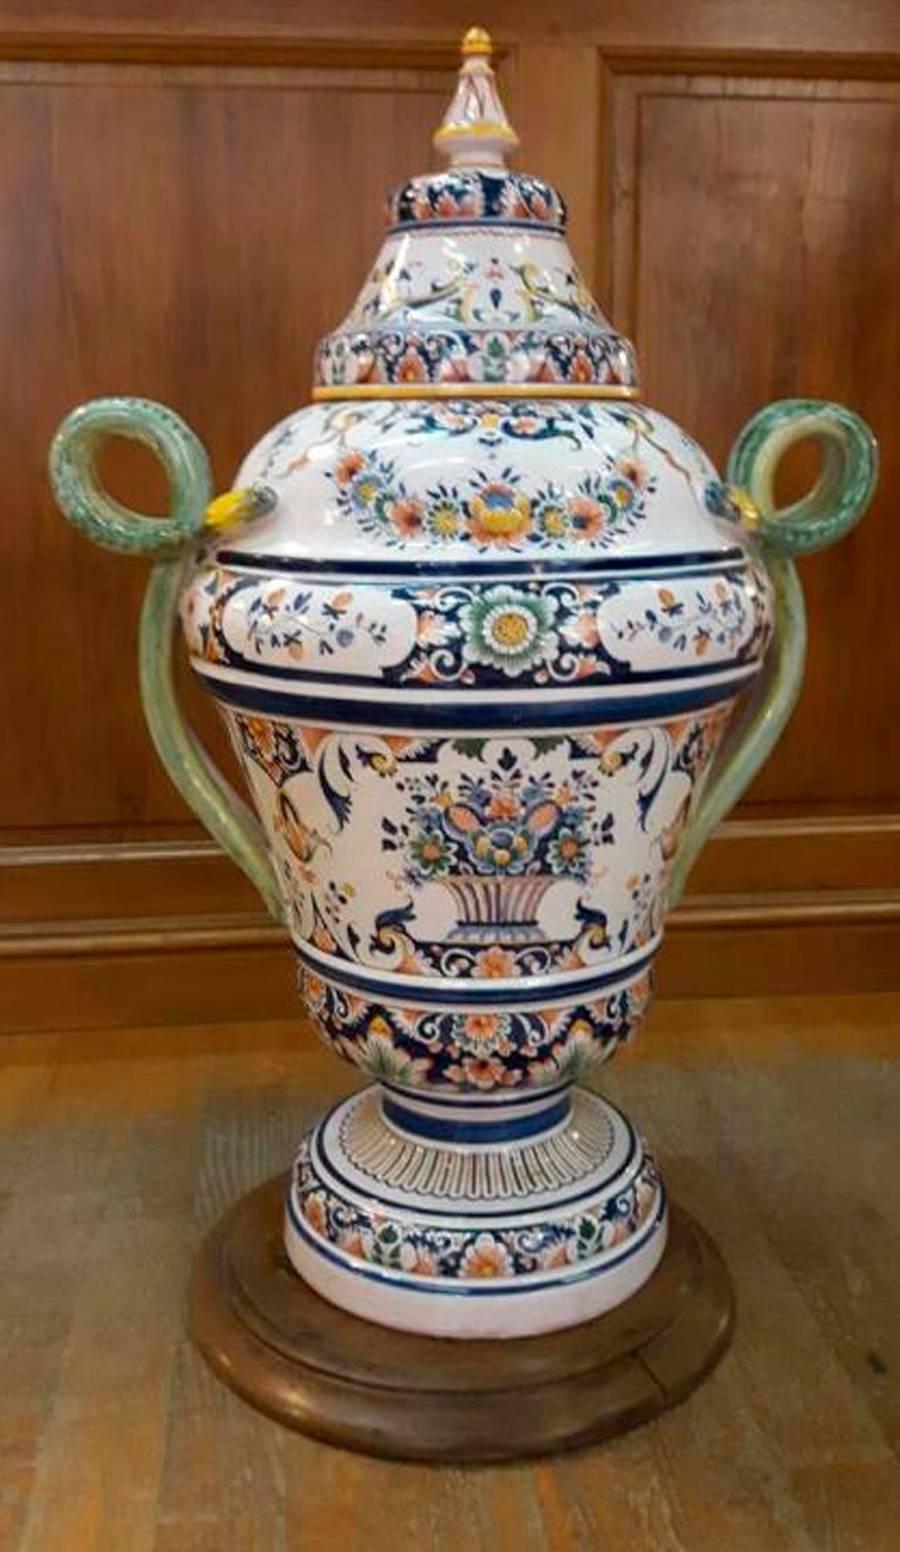 One of kind handcrafted, hand-painted French Provincial style Faience de Rouen pharmacy bottle pot of Theriaca ( a mixture of many drugs and honey formerly held to be an antidote to poison)
Made in the authentic old style way in the antique and